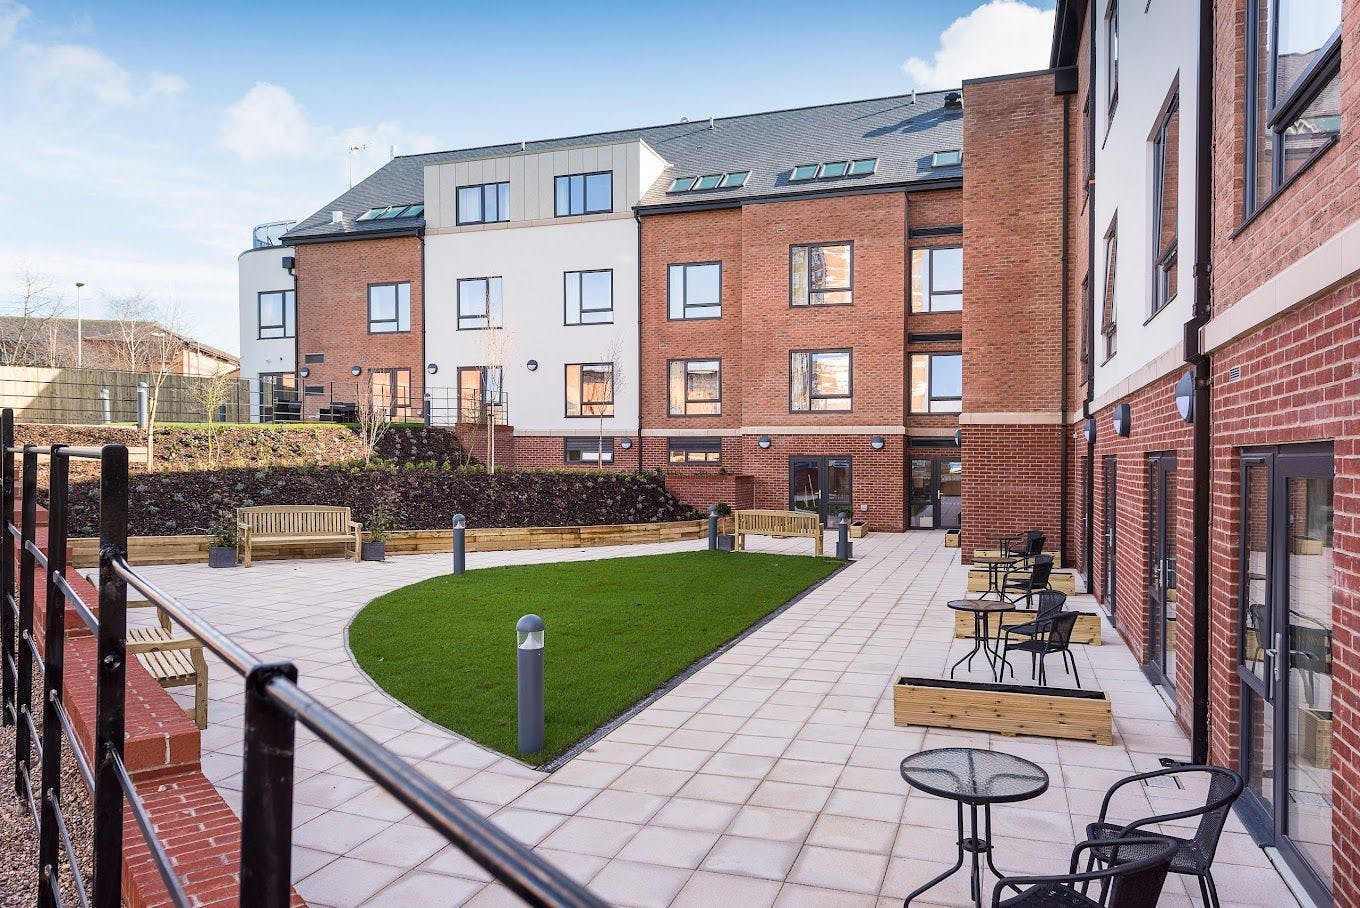 Garden of Seacroft Green care home in Leeds, Yorkshire